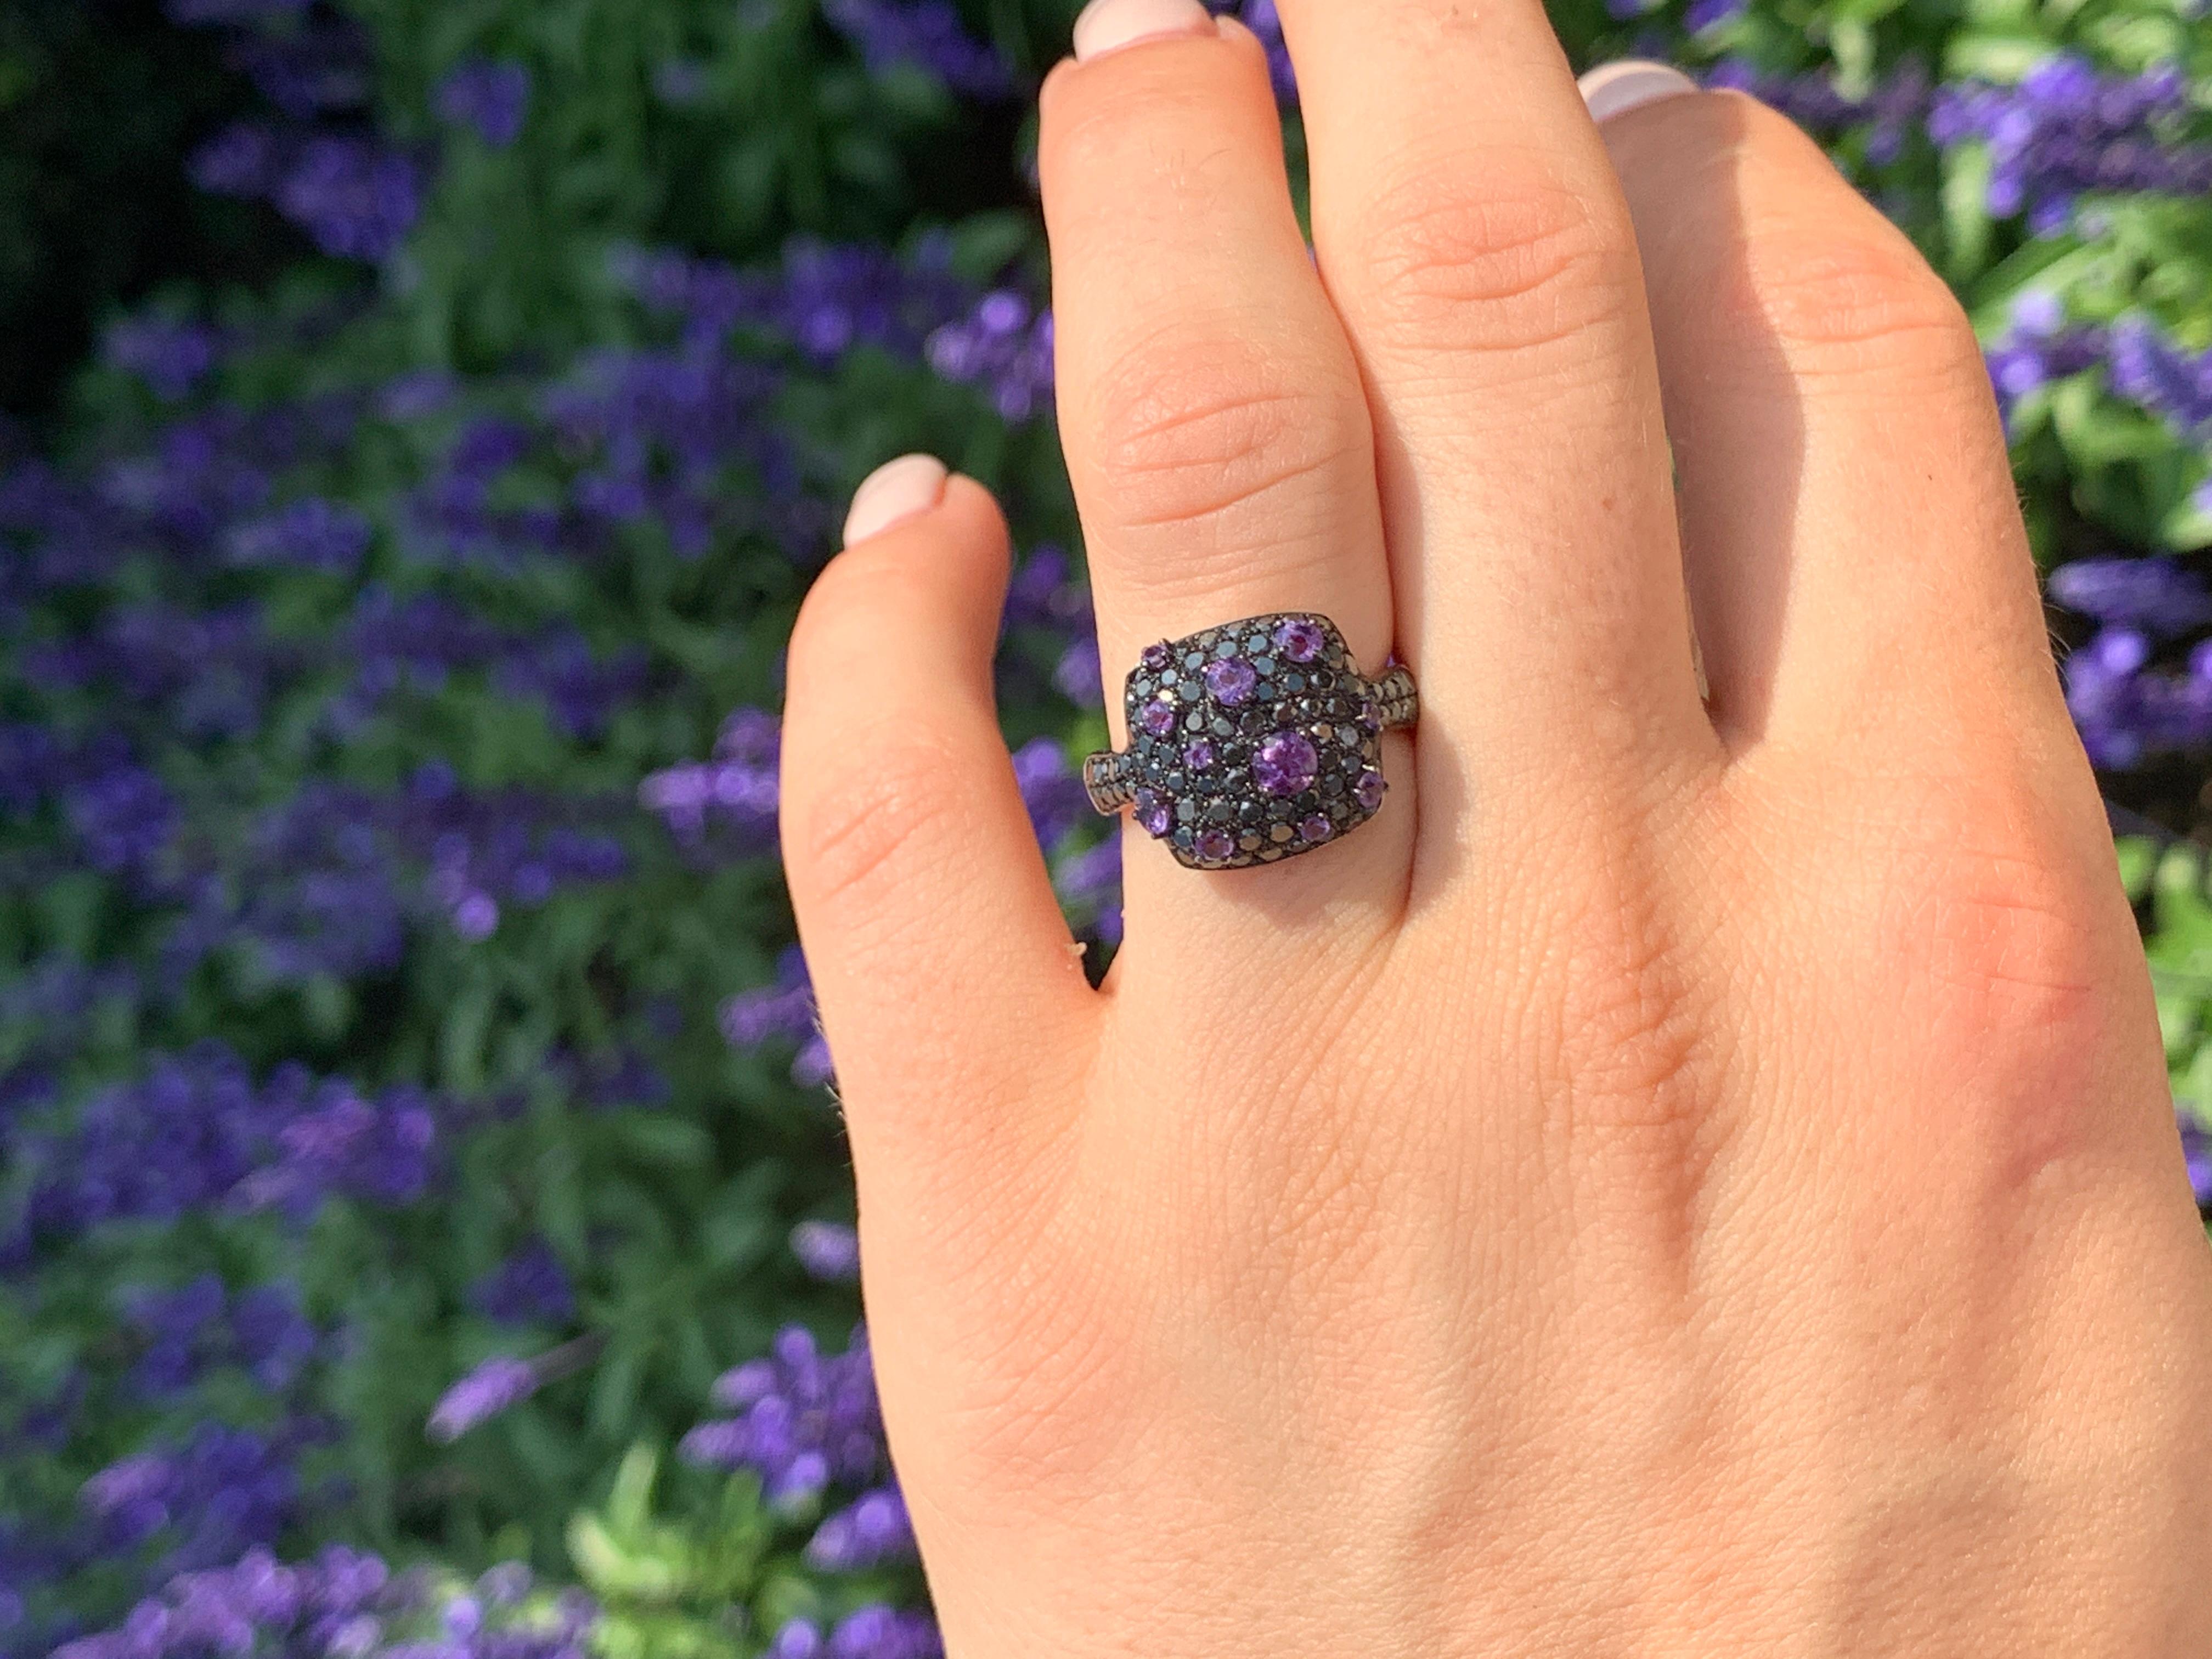 Ring White Gold 18 K 

Diamond 81-Round 57-1,09ct
Amethyst 4-0,79ct
Amethyst 3-0,12ct
Amethyst 3-0,32ct
Amethyst 1-0,23ct

Weight 5,37 grams

With a heritage of ancient fine Swiss jewelry traditions, NATKINA is a Geneva based jewellery brand, which